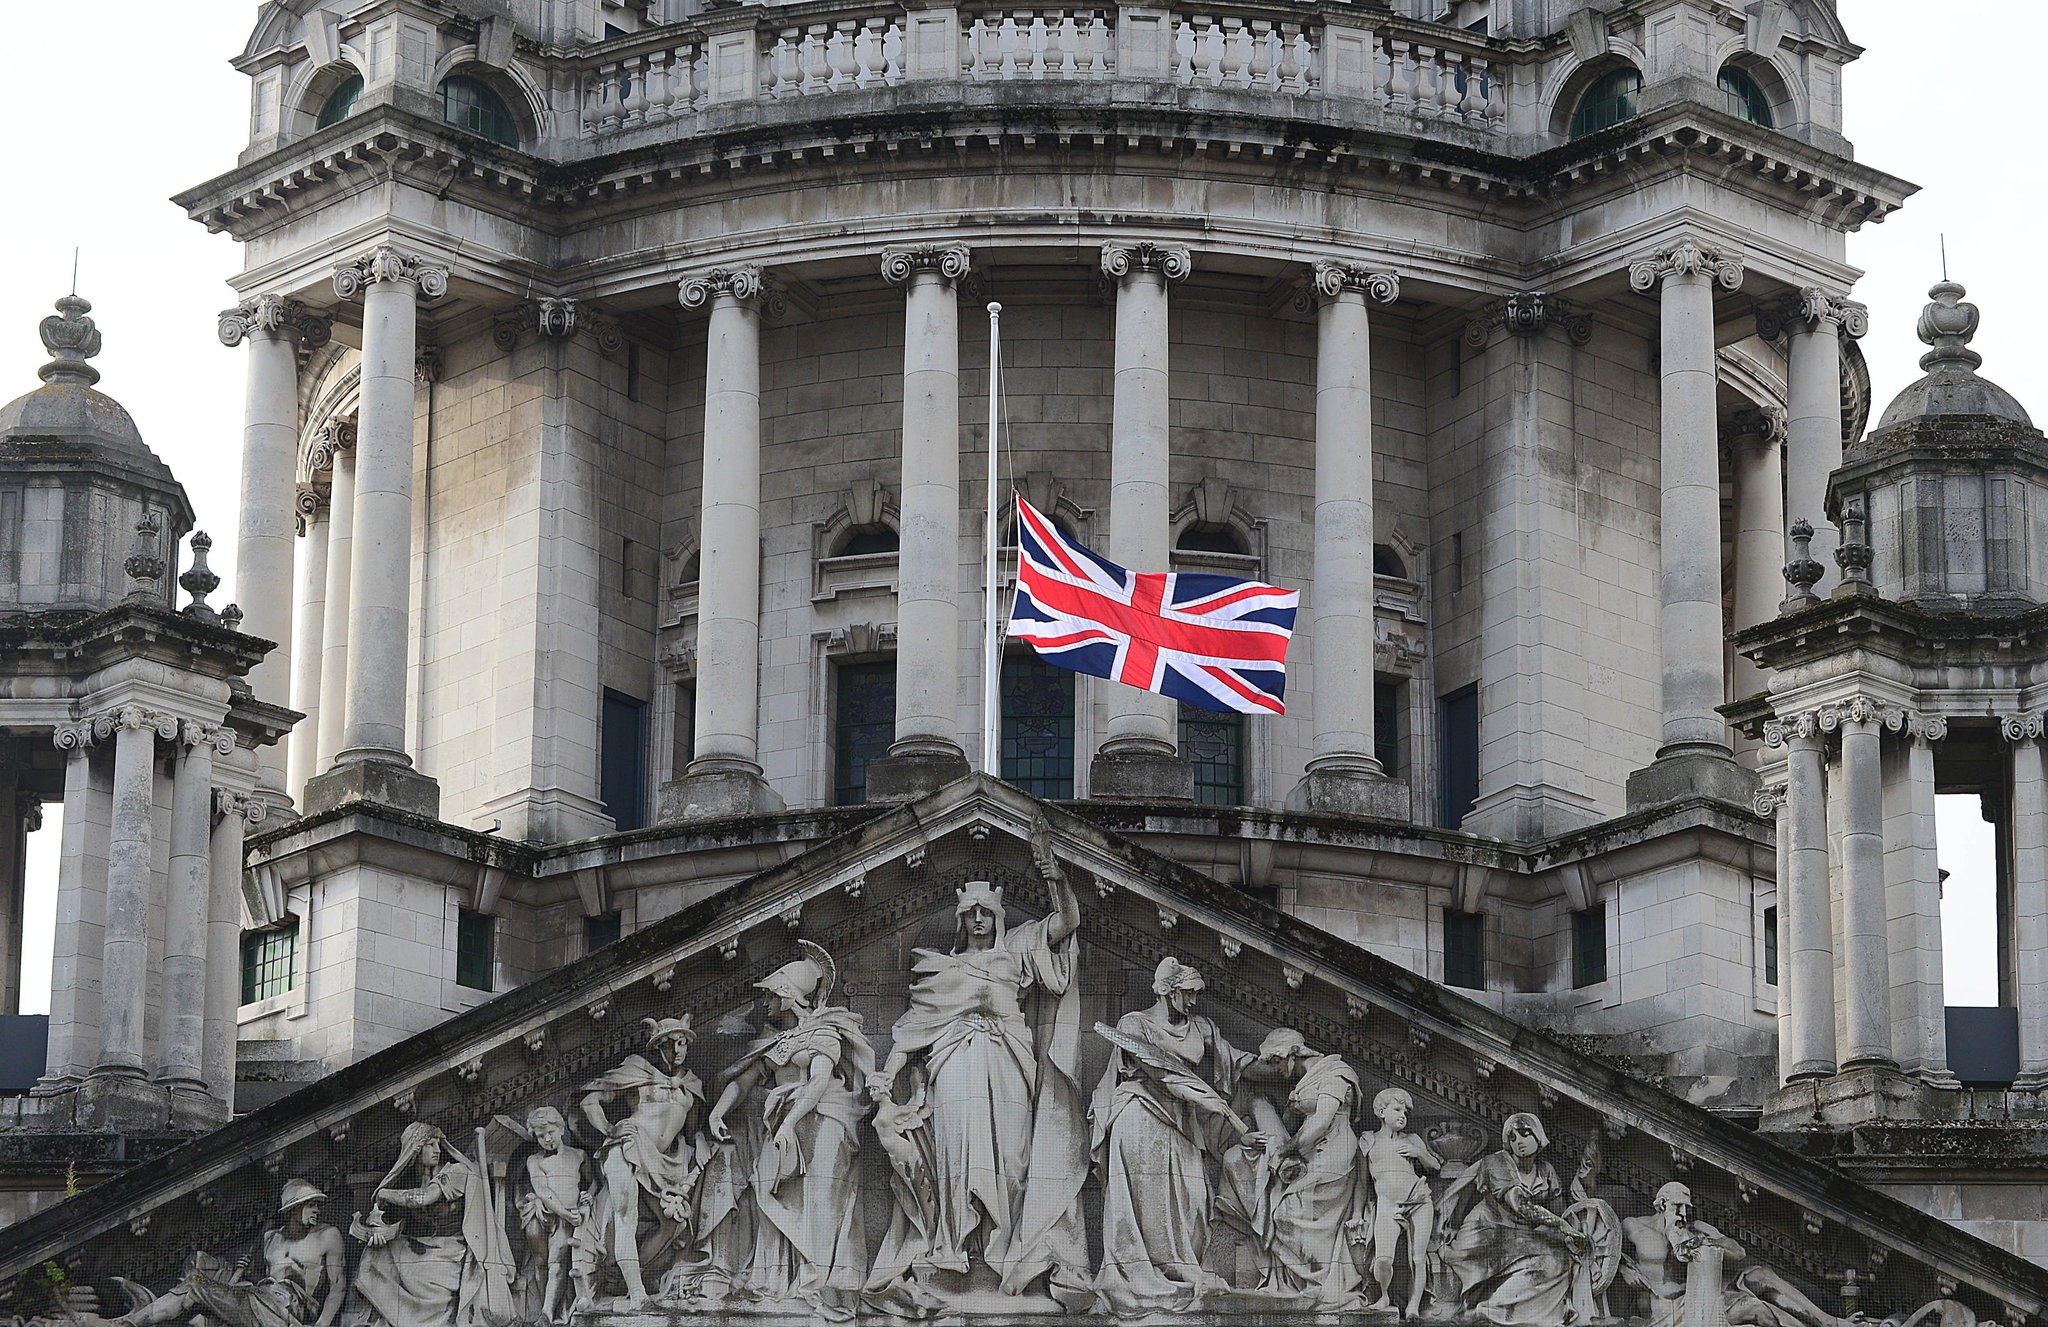 Debate on decision to reduce dates for flying Union Flag by seven days